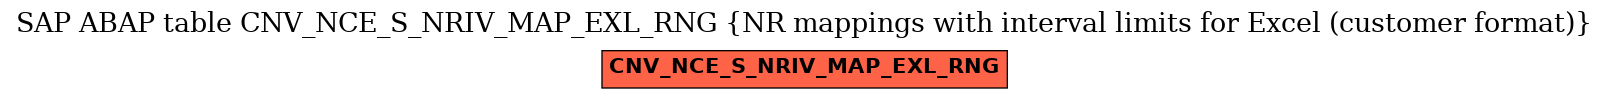 E-R Diagram for table CNV_NCE_S_NRIV_MAP_EXL_RNG (NR mappings with interval limits for Excel (customer format))